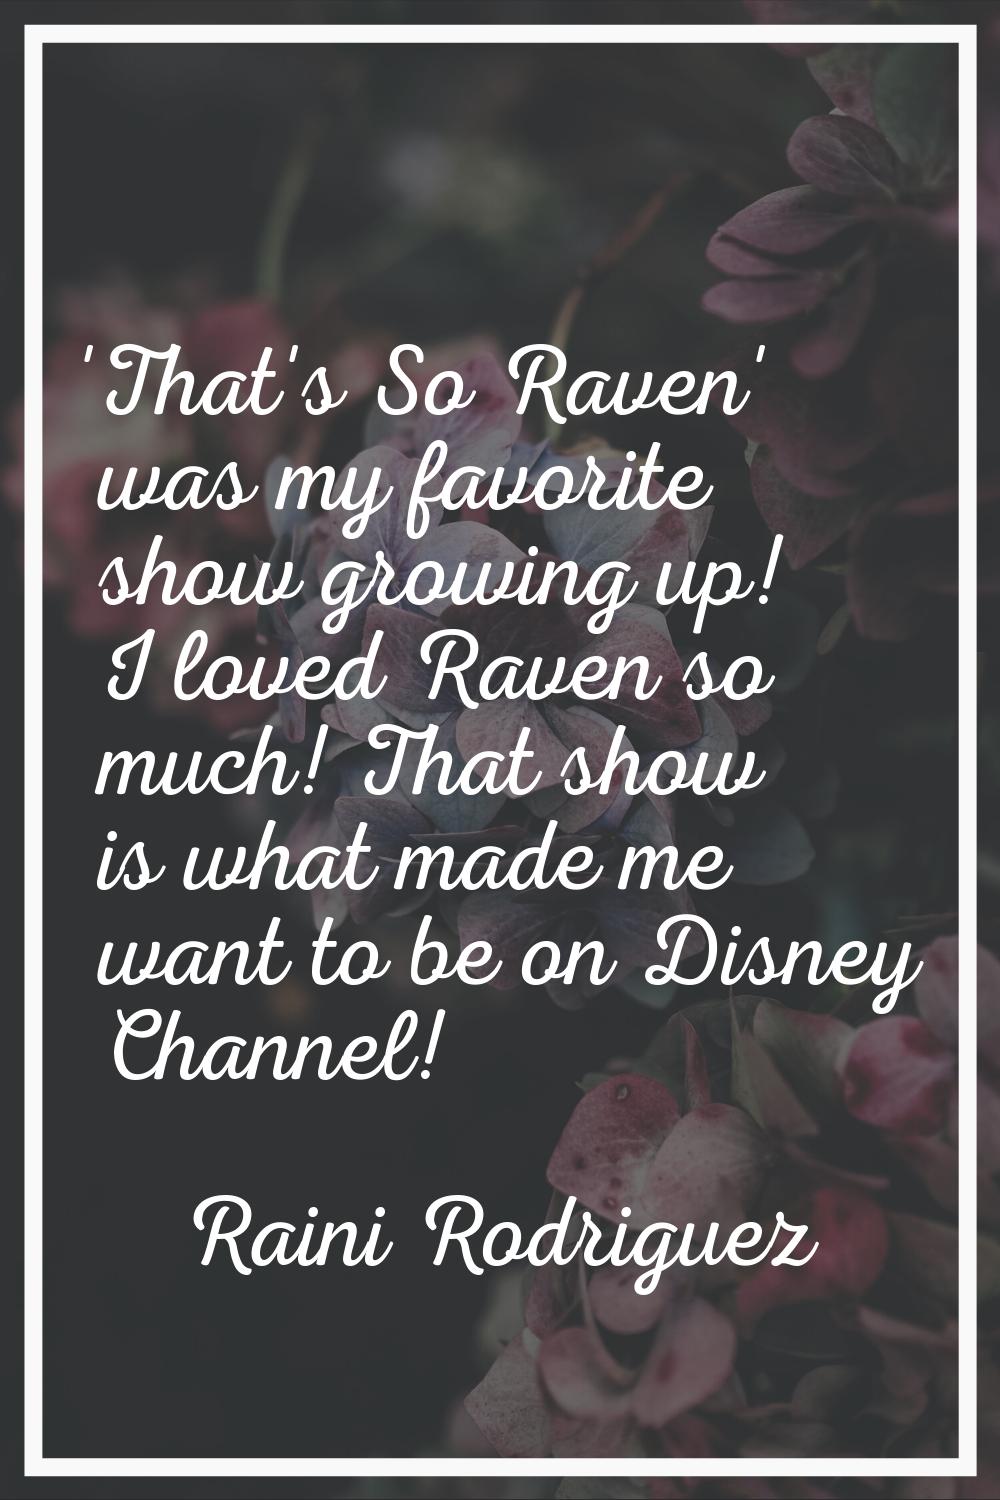 'That's So Raven' was my favorite show growing up! I loved Raven so much! That show is what made me